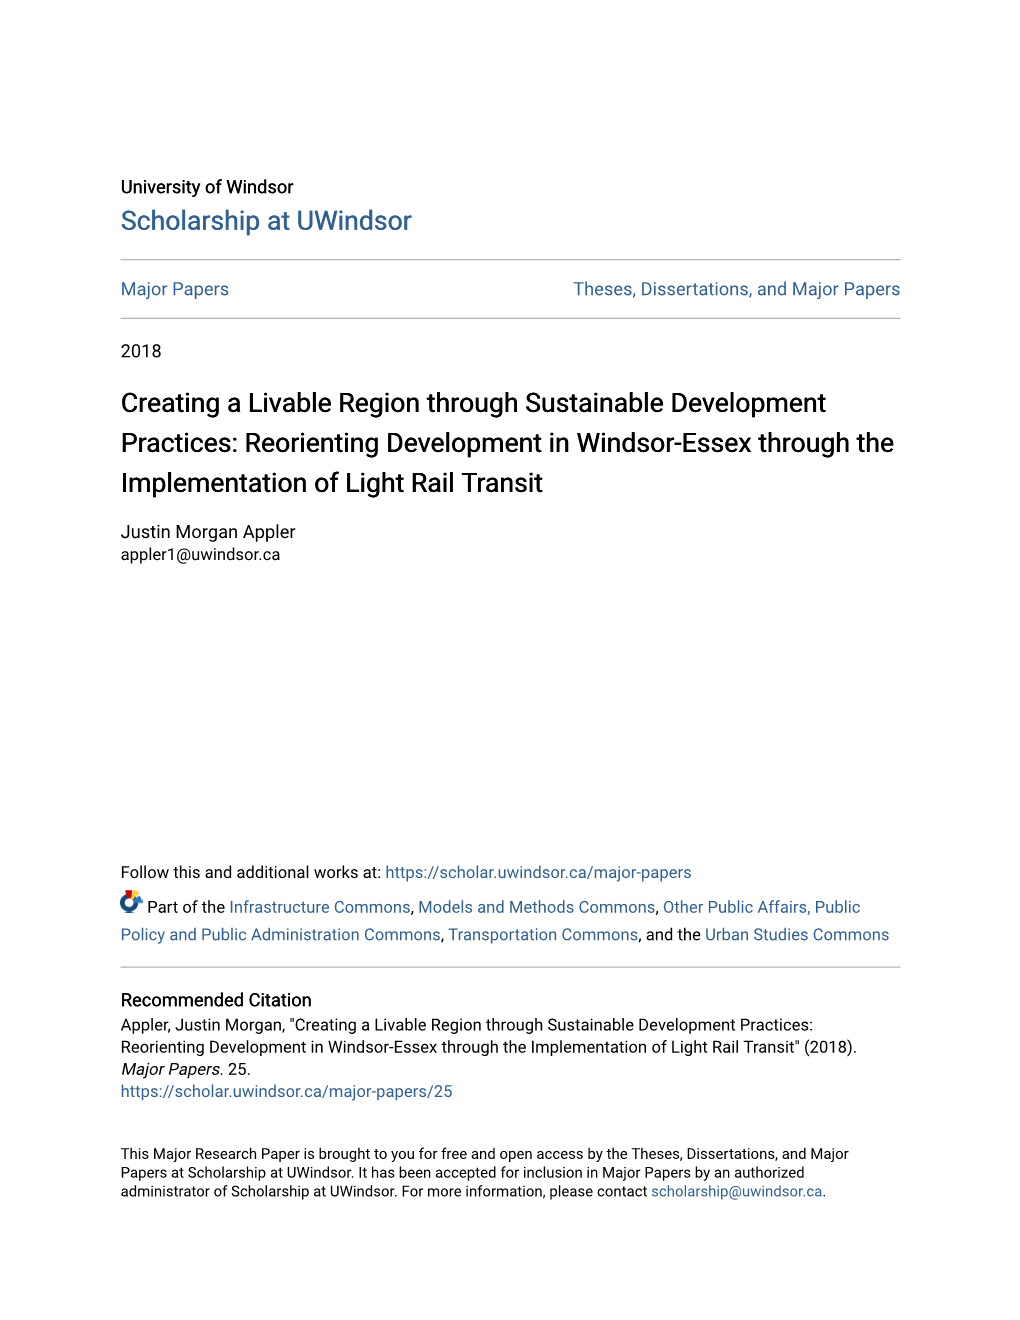 Creating a Livable Region Through Sustainable Development Practices: Reorienting Development in Windsor-Essex Through the Implementation of Light Rail Transit